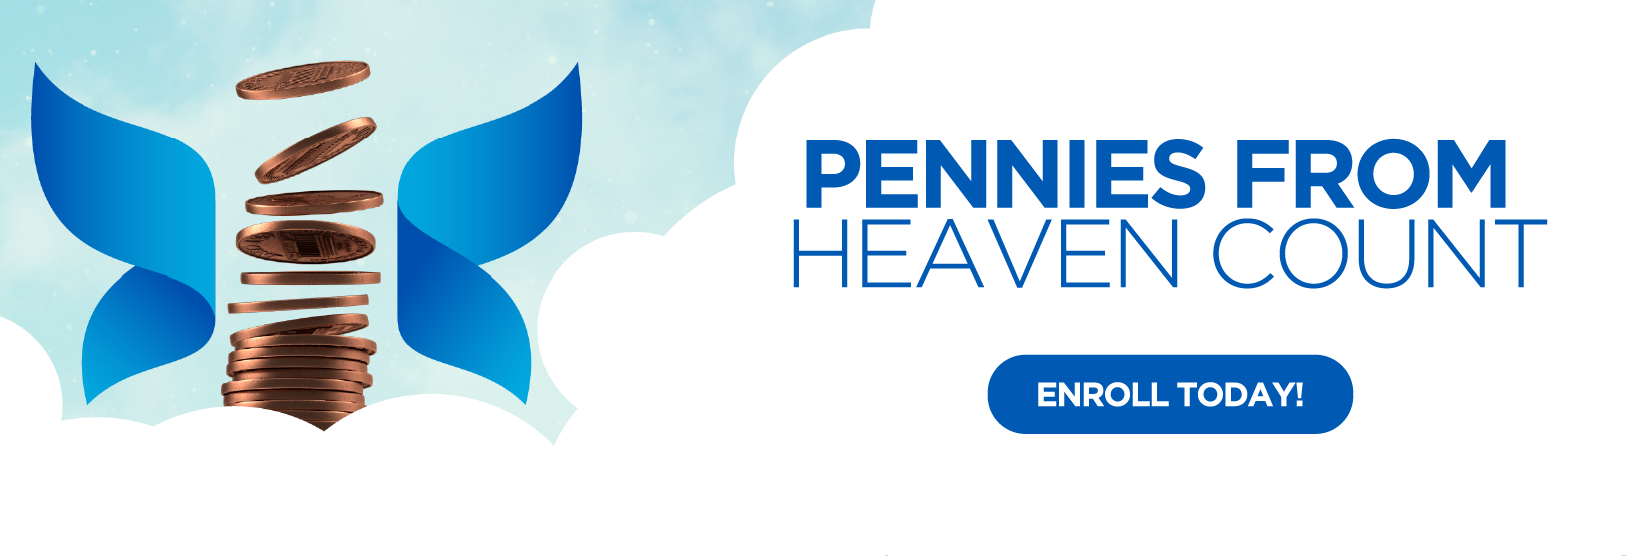 SECO News June 2020 Pennies From Heaven Count